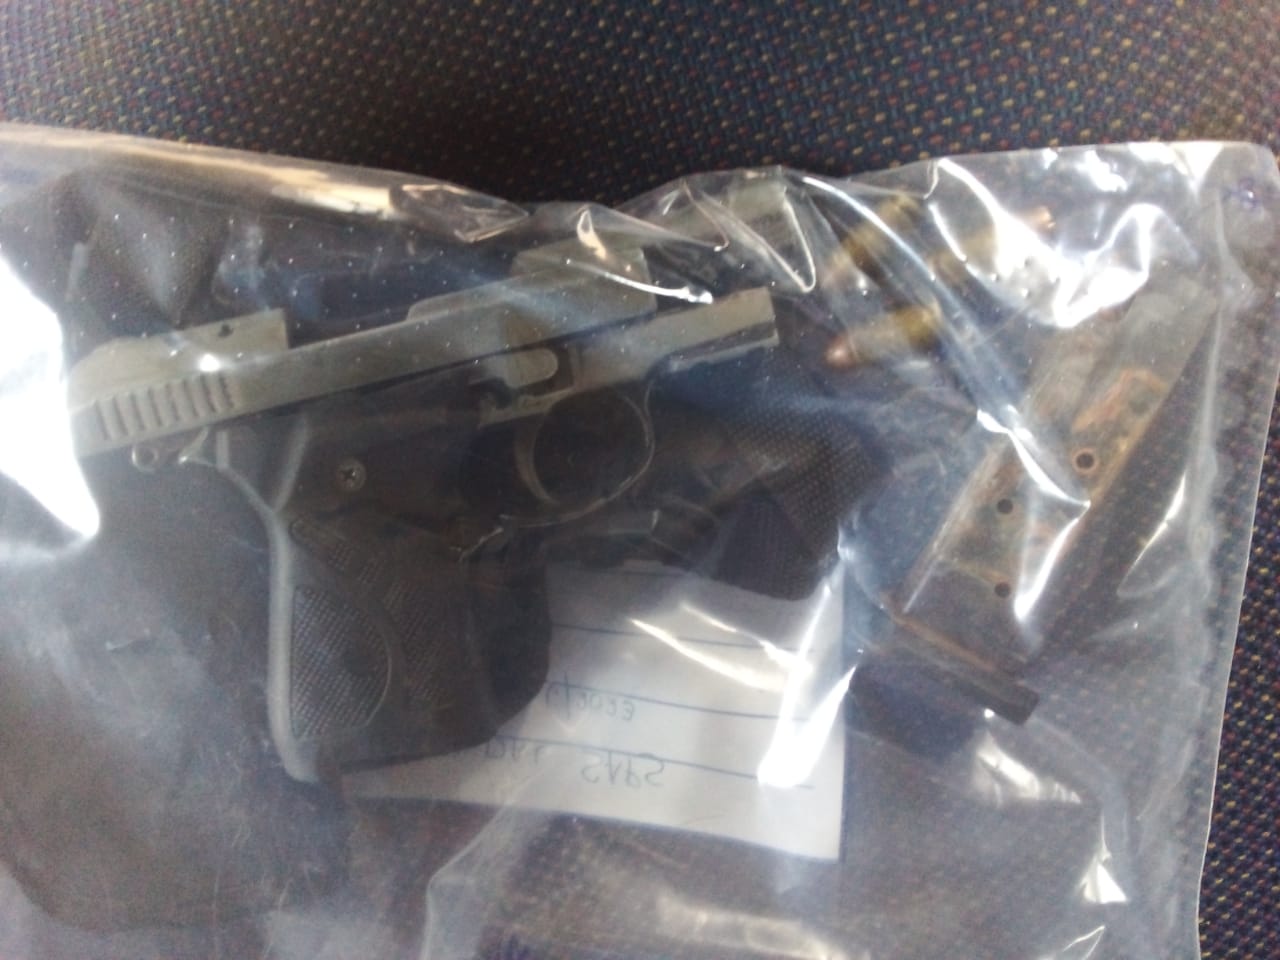 An intelligence-driven operation by police in Westrand District leads to the recovery of an unlicensed firearm, ammunition and drugs in Bekkersdal